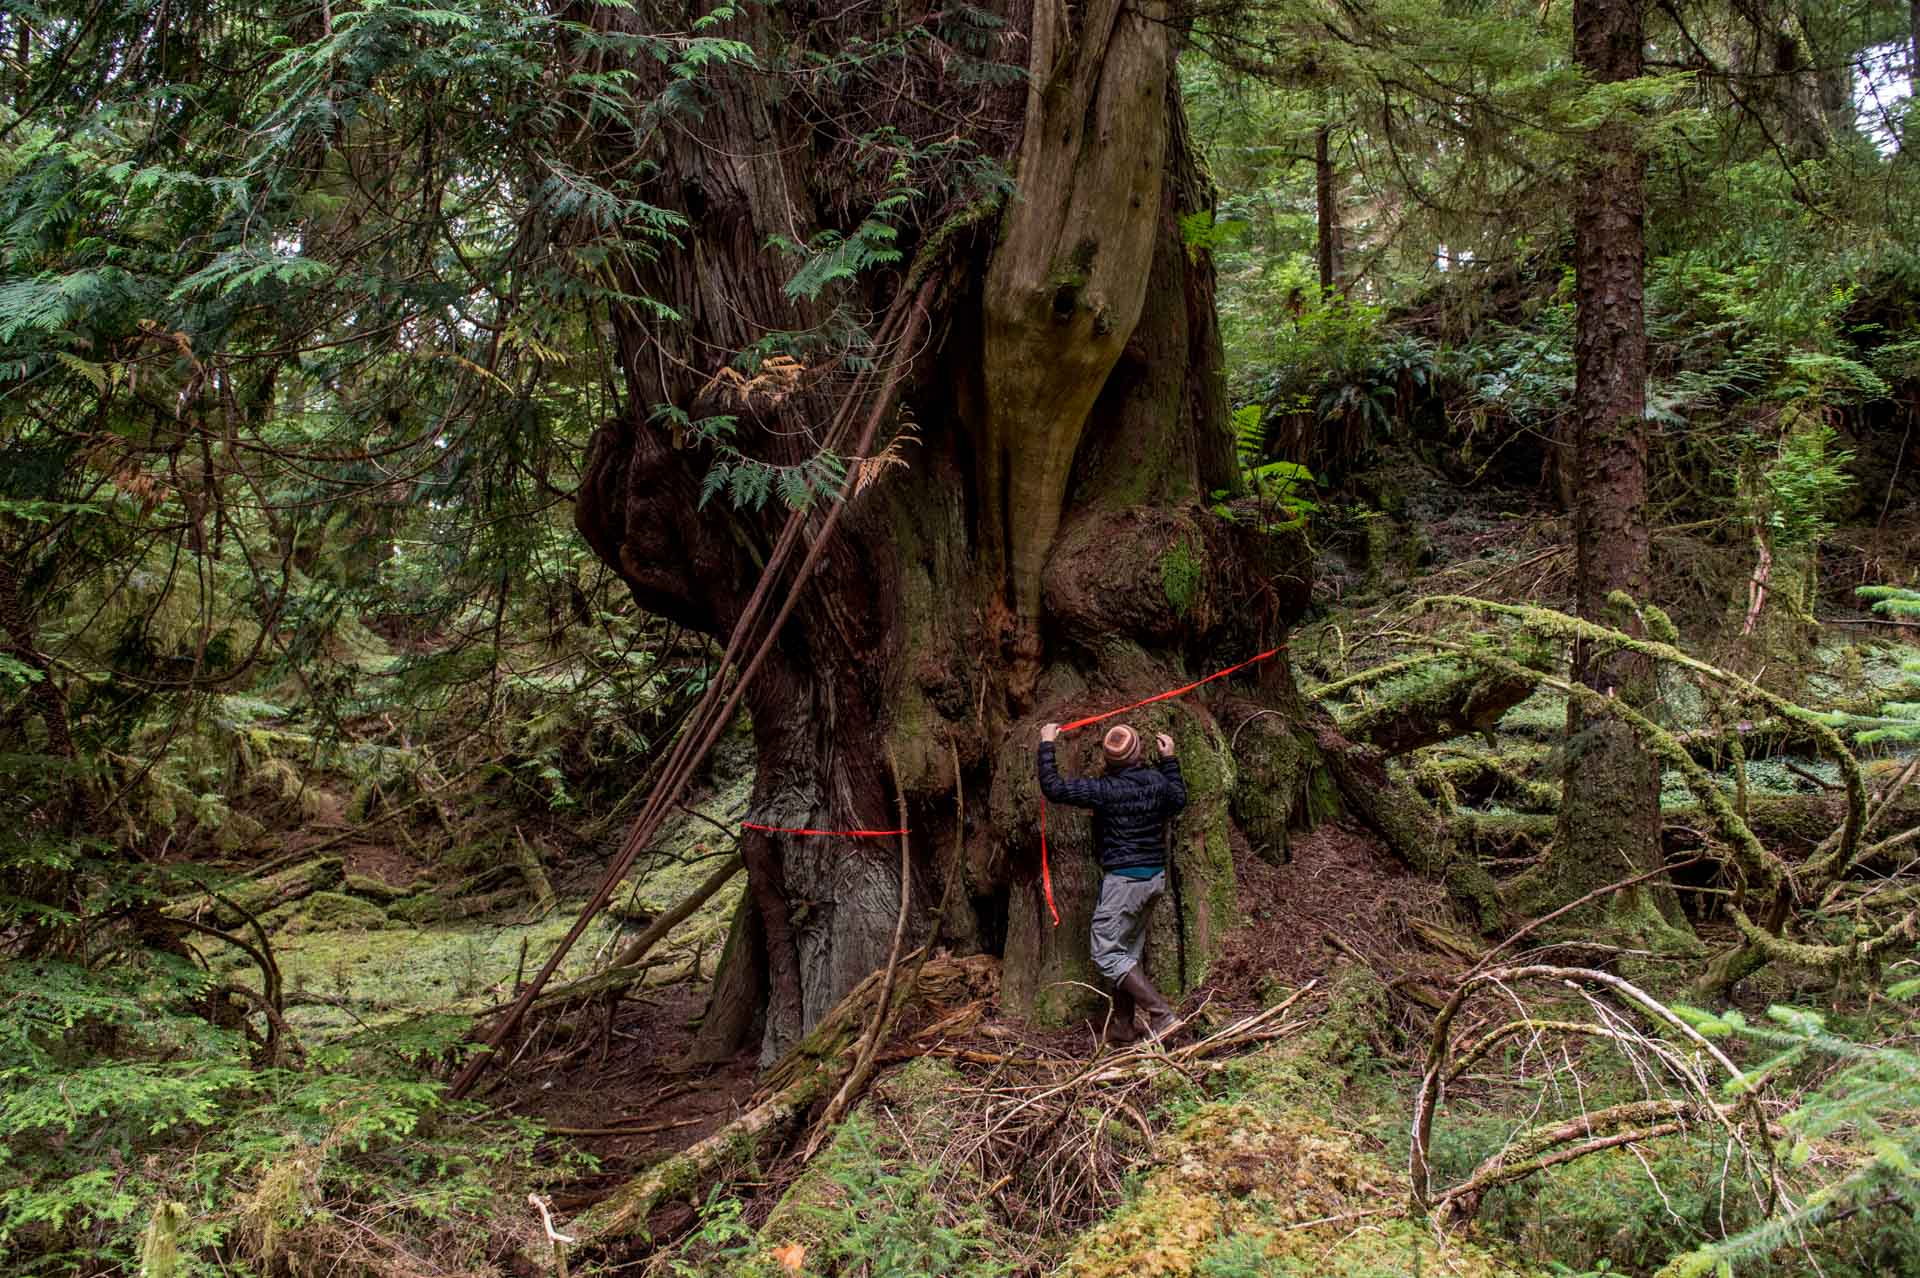 Parks Canada employee fnds a massive Cedar in the forest interior.